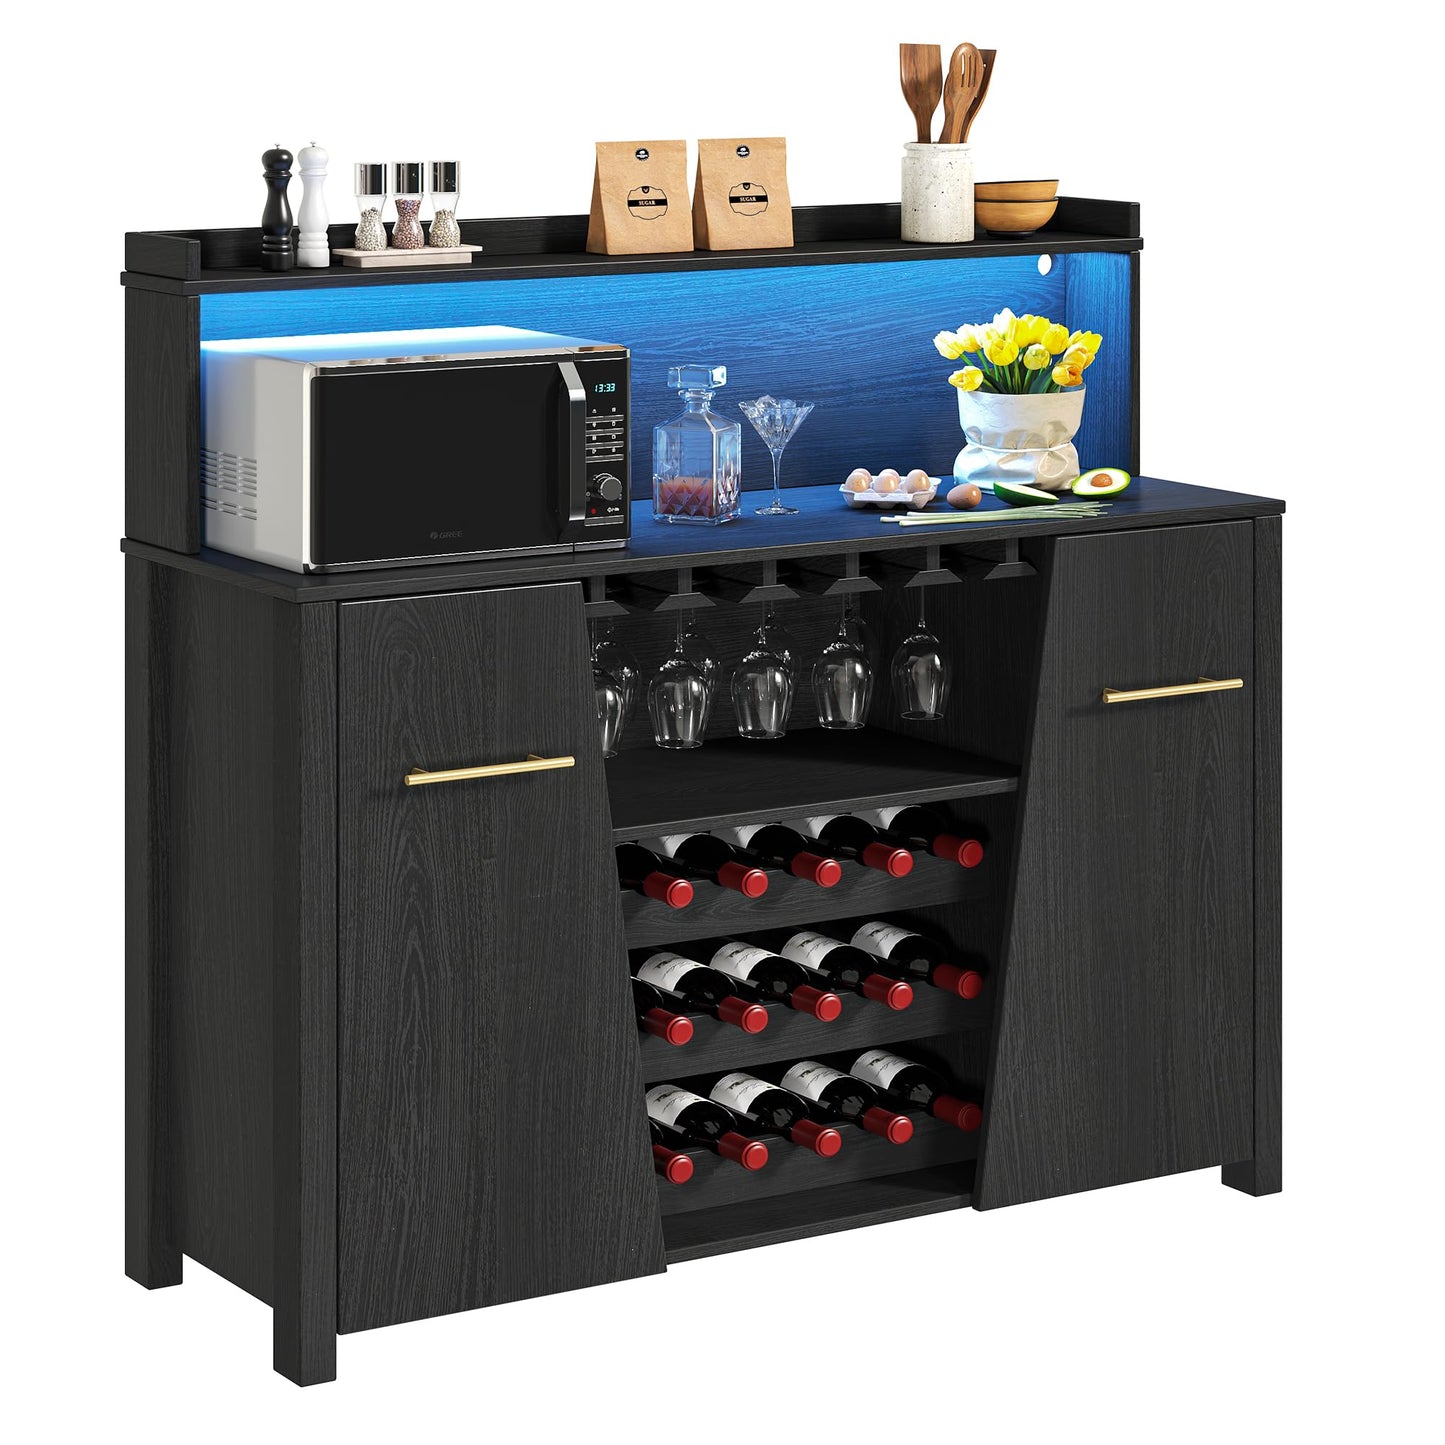 DWVO Sideboard Buffet Cabinet w/LED Lights, 47'' Coffee Bar Cabinet with Storage, Wine Rack and Glass Holder, Liquor Cabinet w/Adjustable Shelf for Living Room, Kitchen, Dining Room, Black